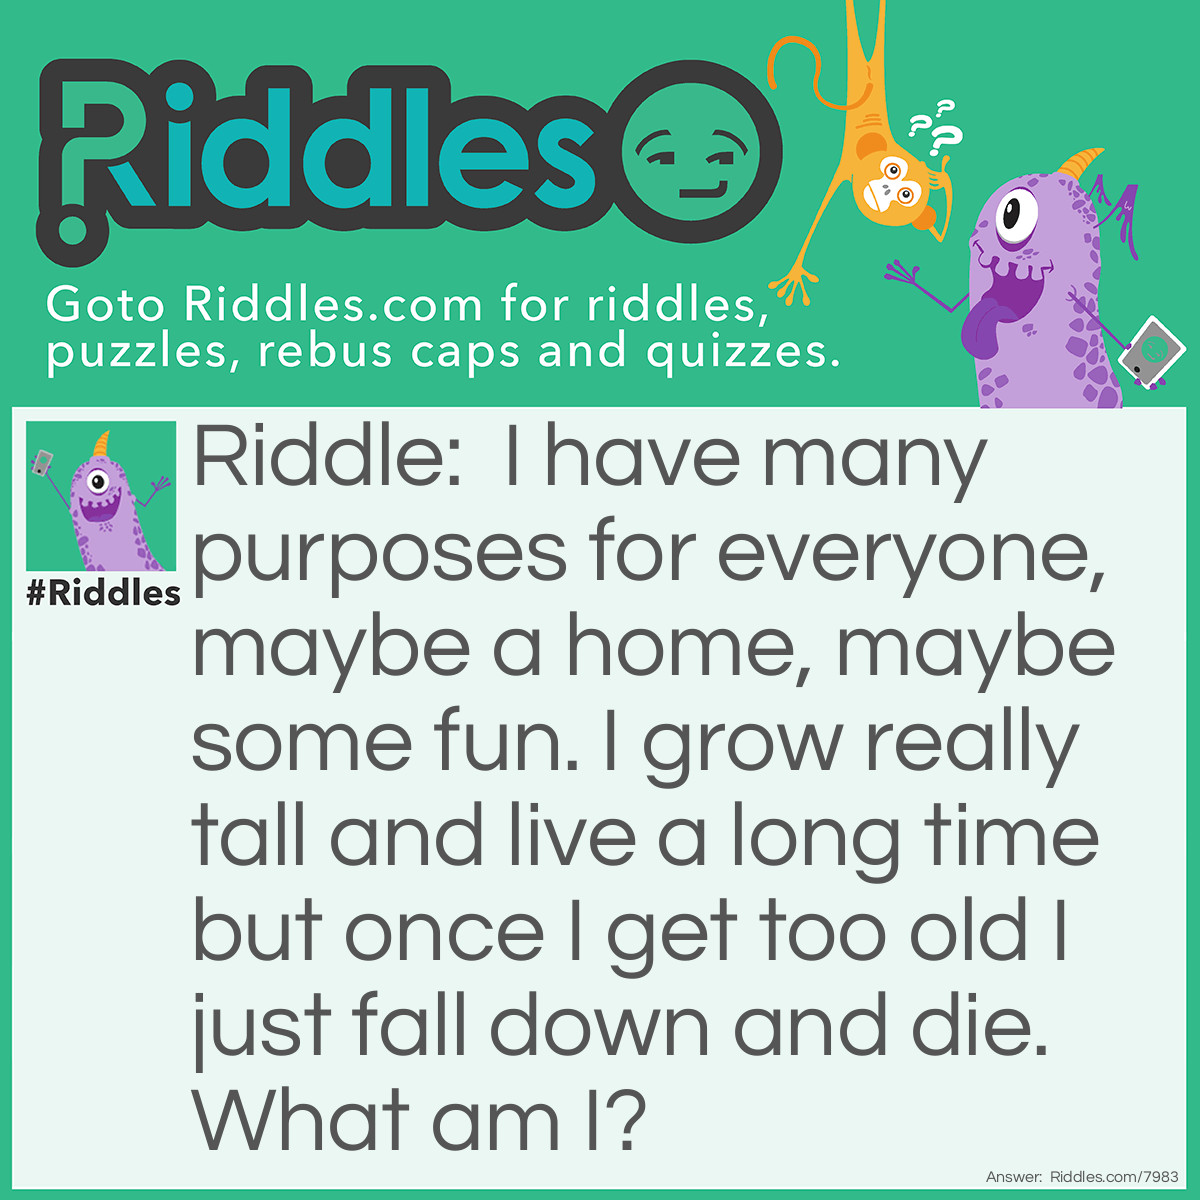 Riddle: I have many purposes for everyone, maybe a home, maybe some fun. I grow really tall and live a long time but once I get too old I just fall down and die. What am I? Answer: A tree.